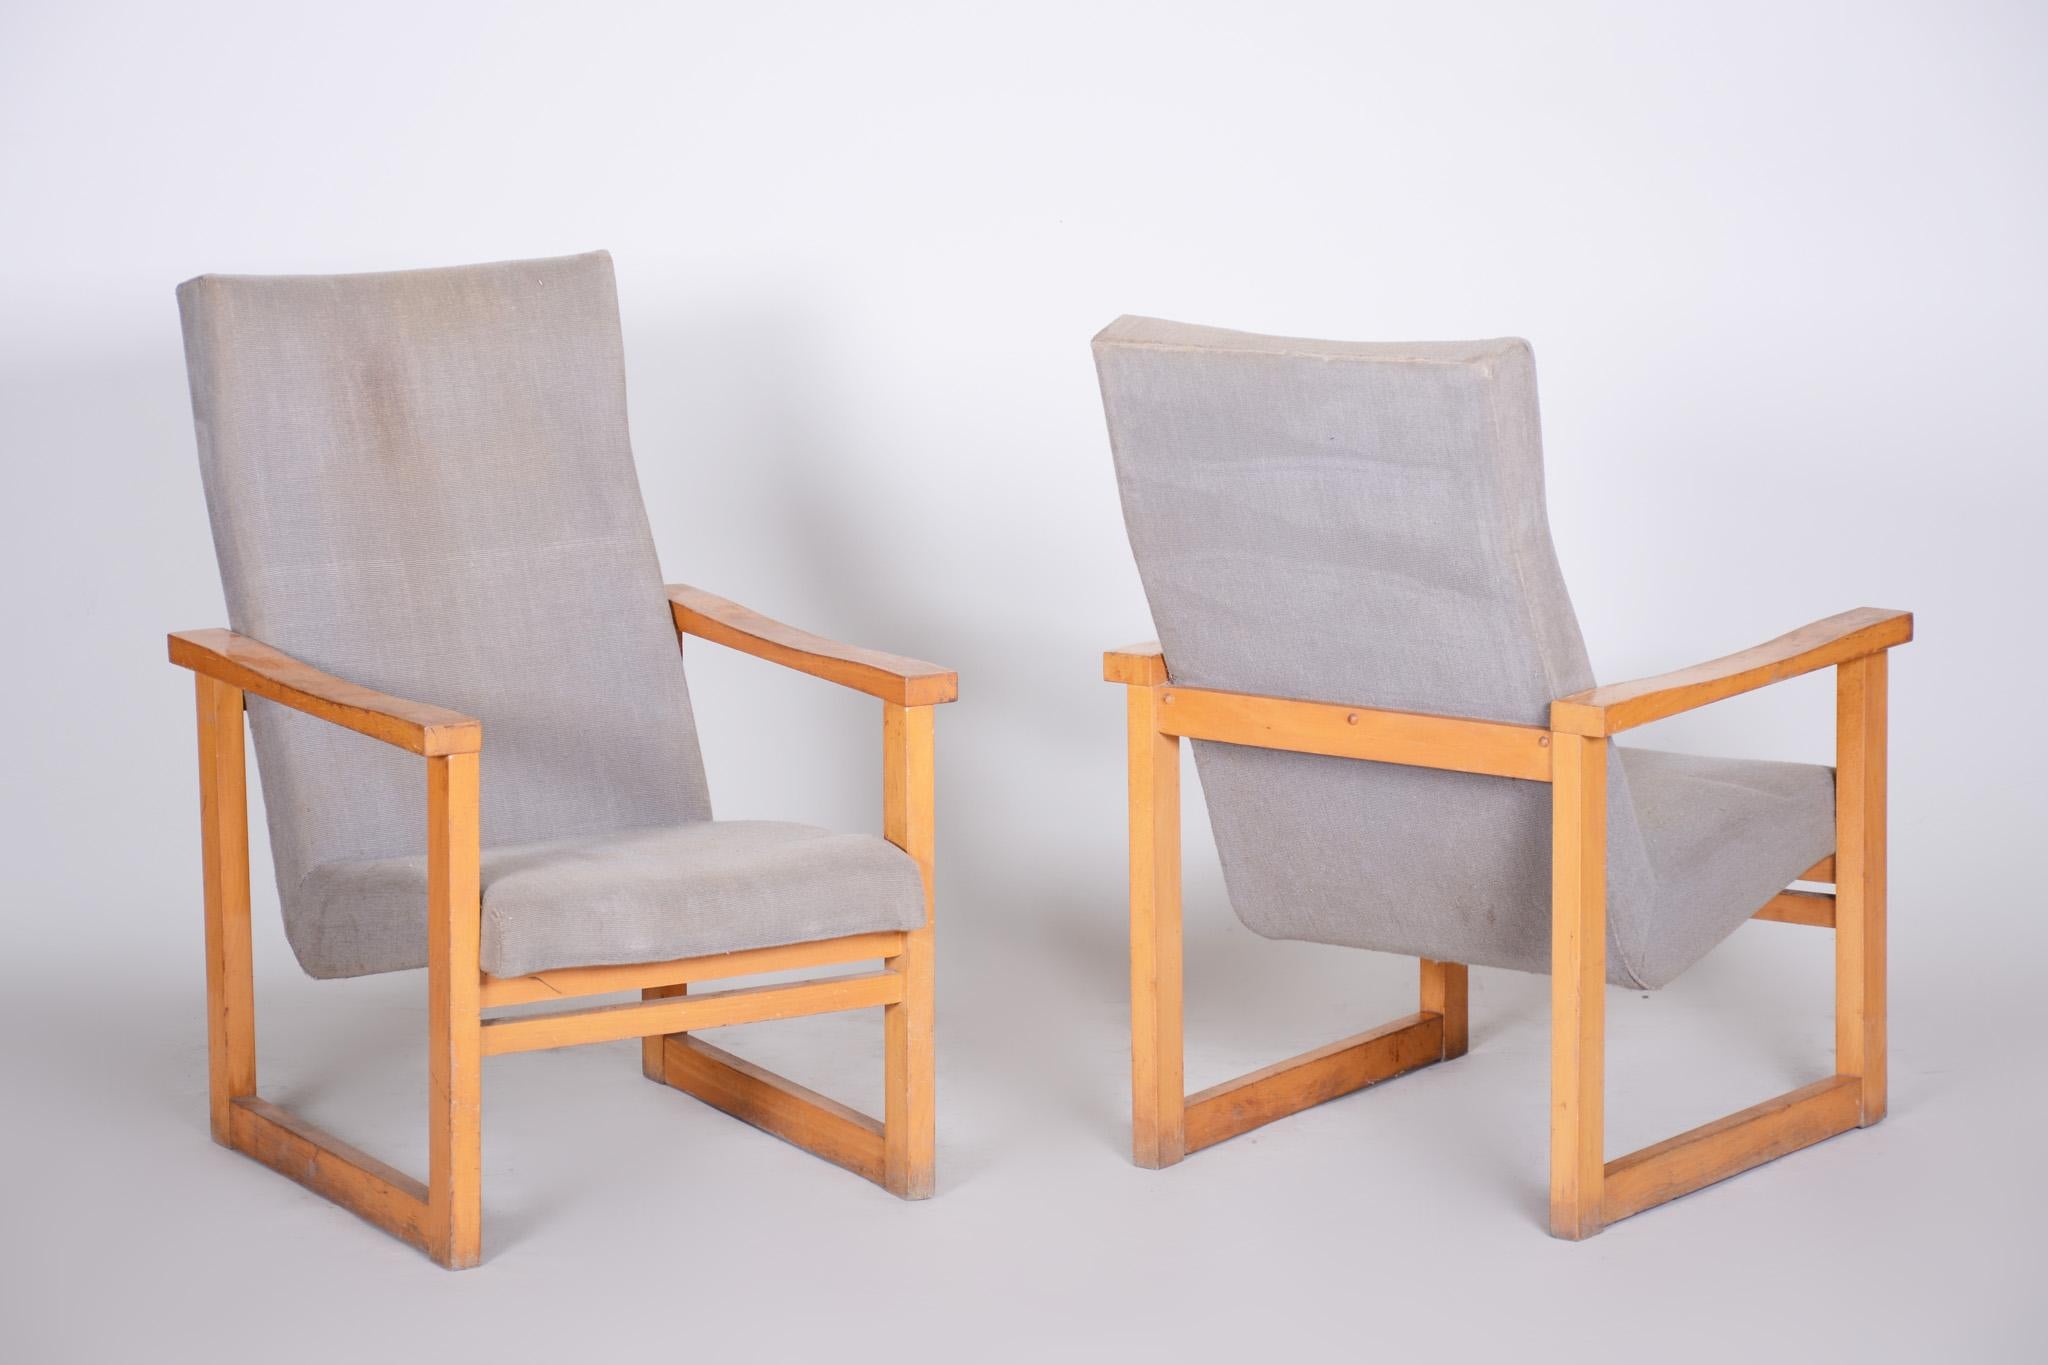 20th Century, Beige Pair of Maple Armchairs, Original Condition, Czechia, 1960s For Sale 2